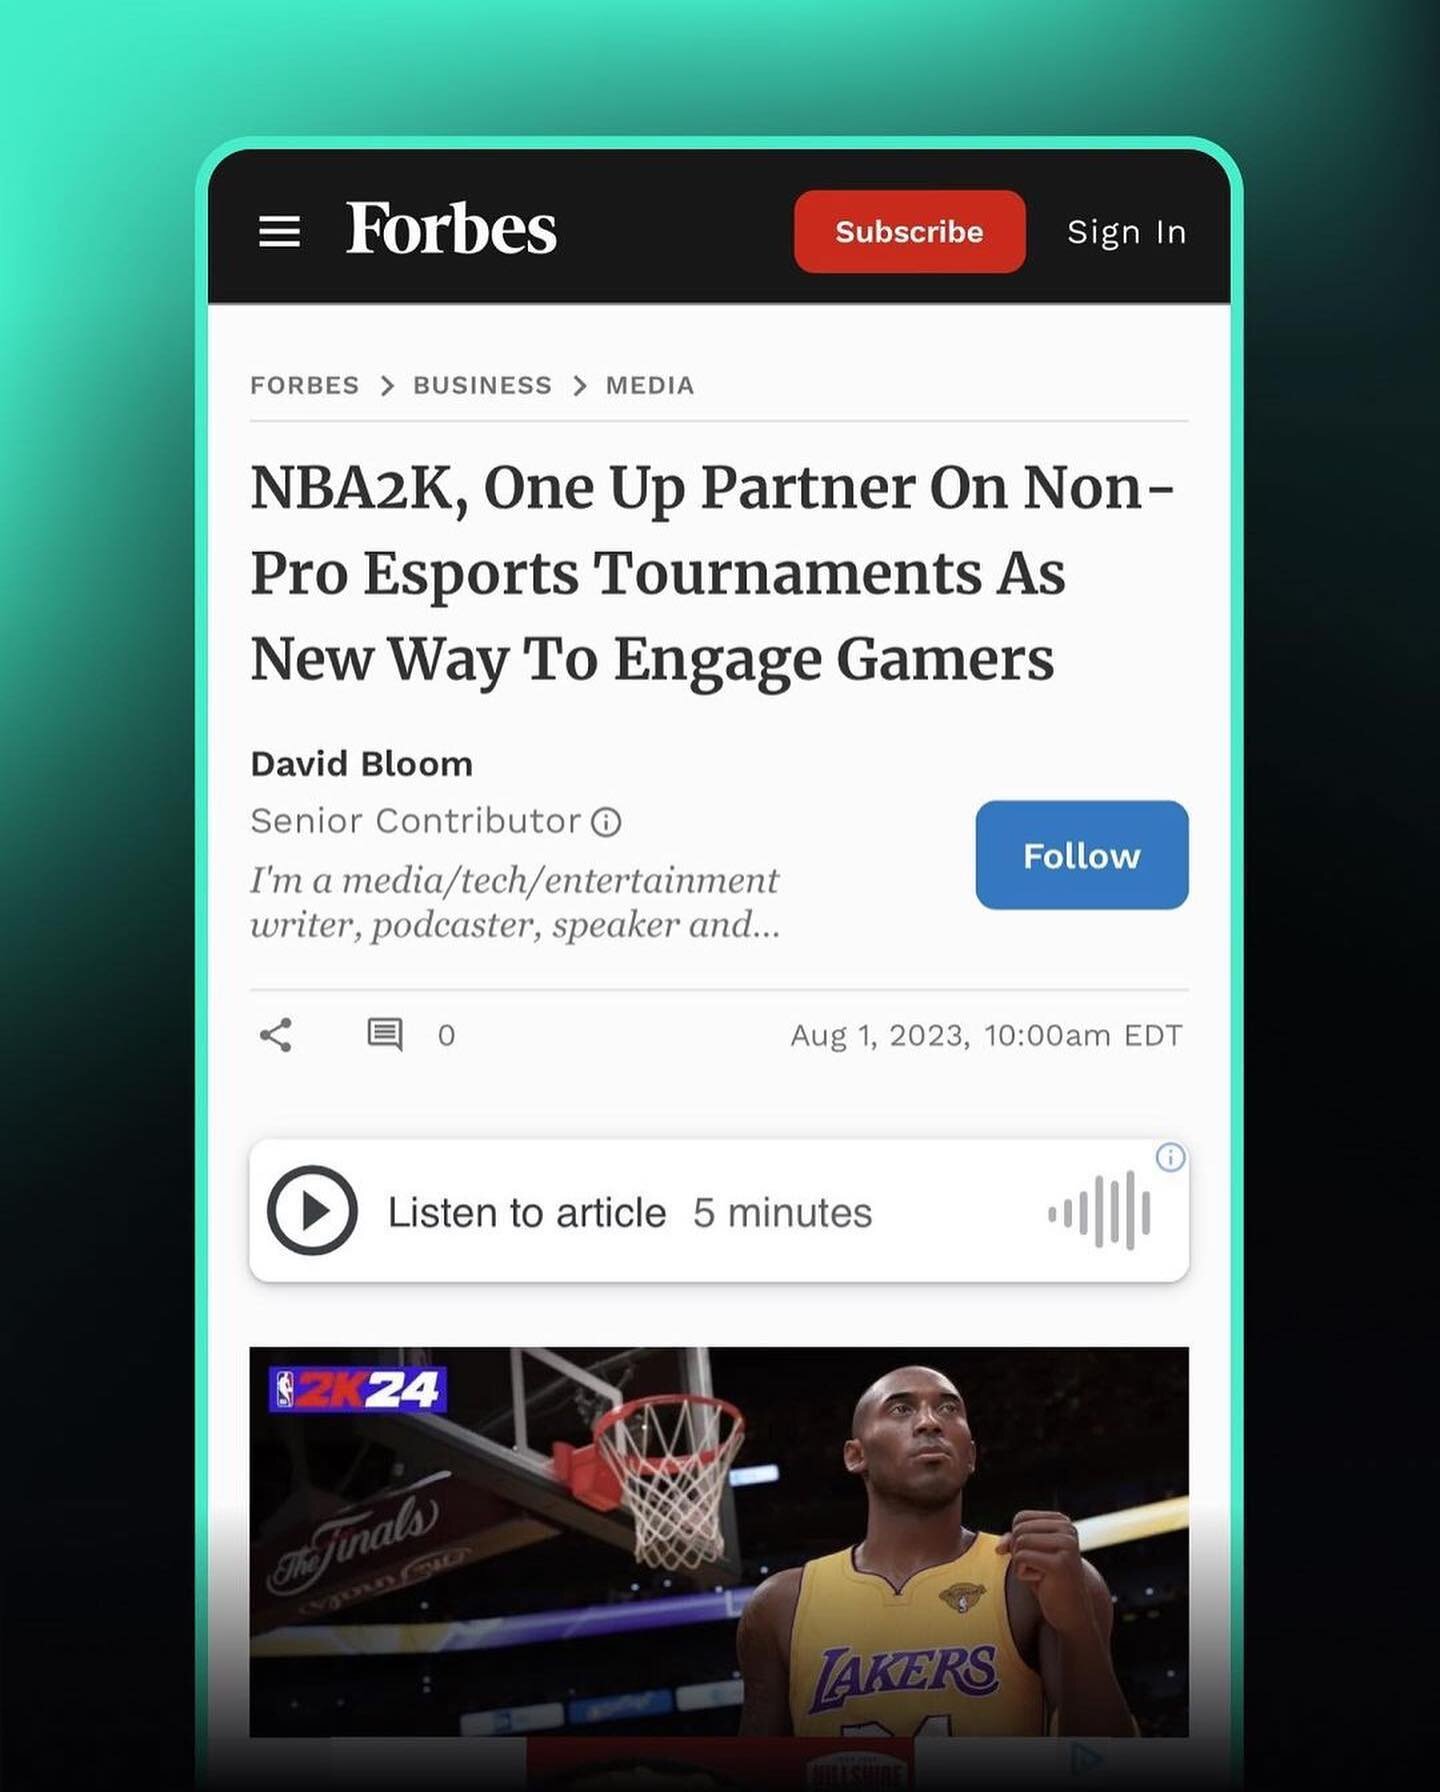 Today was a major announcement for @playoneup, who we&rsquo;ve had the privilege to be working with over the last year. CEO Brandon Pitts and his team secured an eSports partnership with @nba2k and have lots of exciting initiatives brewing. We are pr